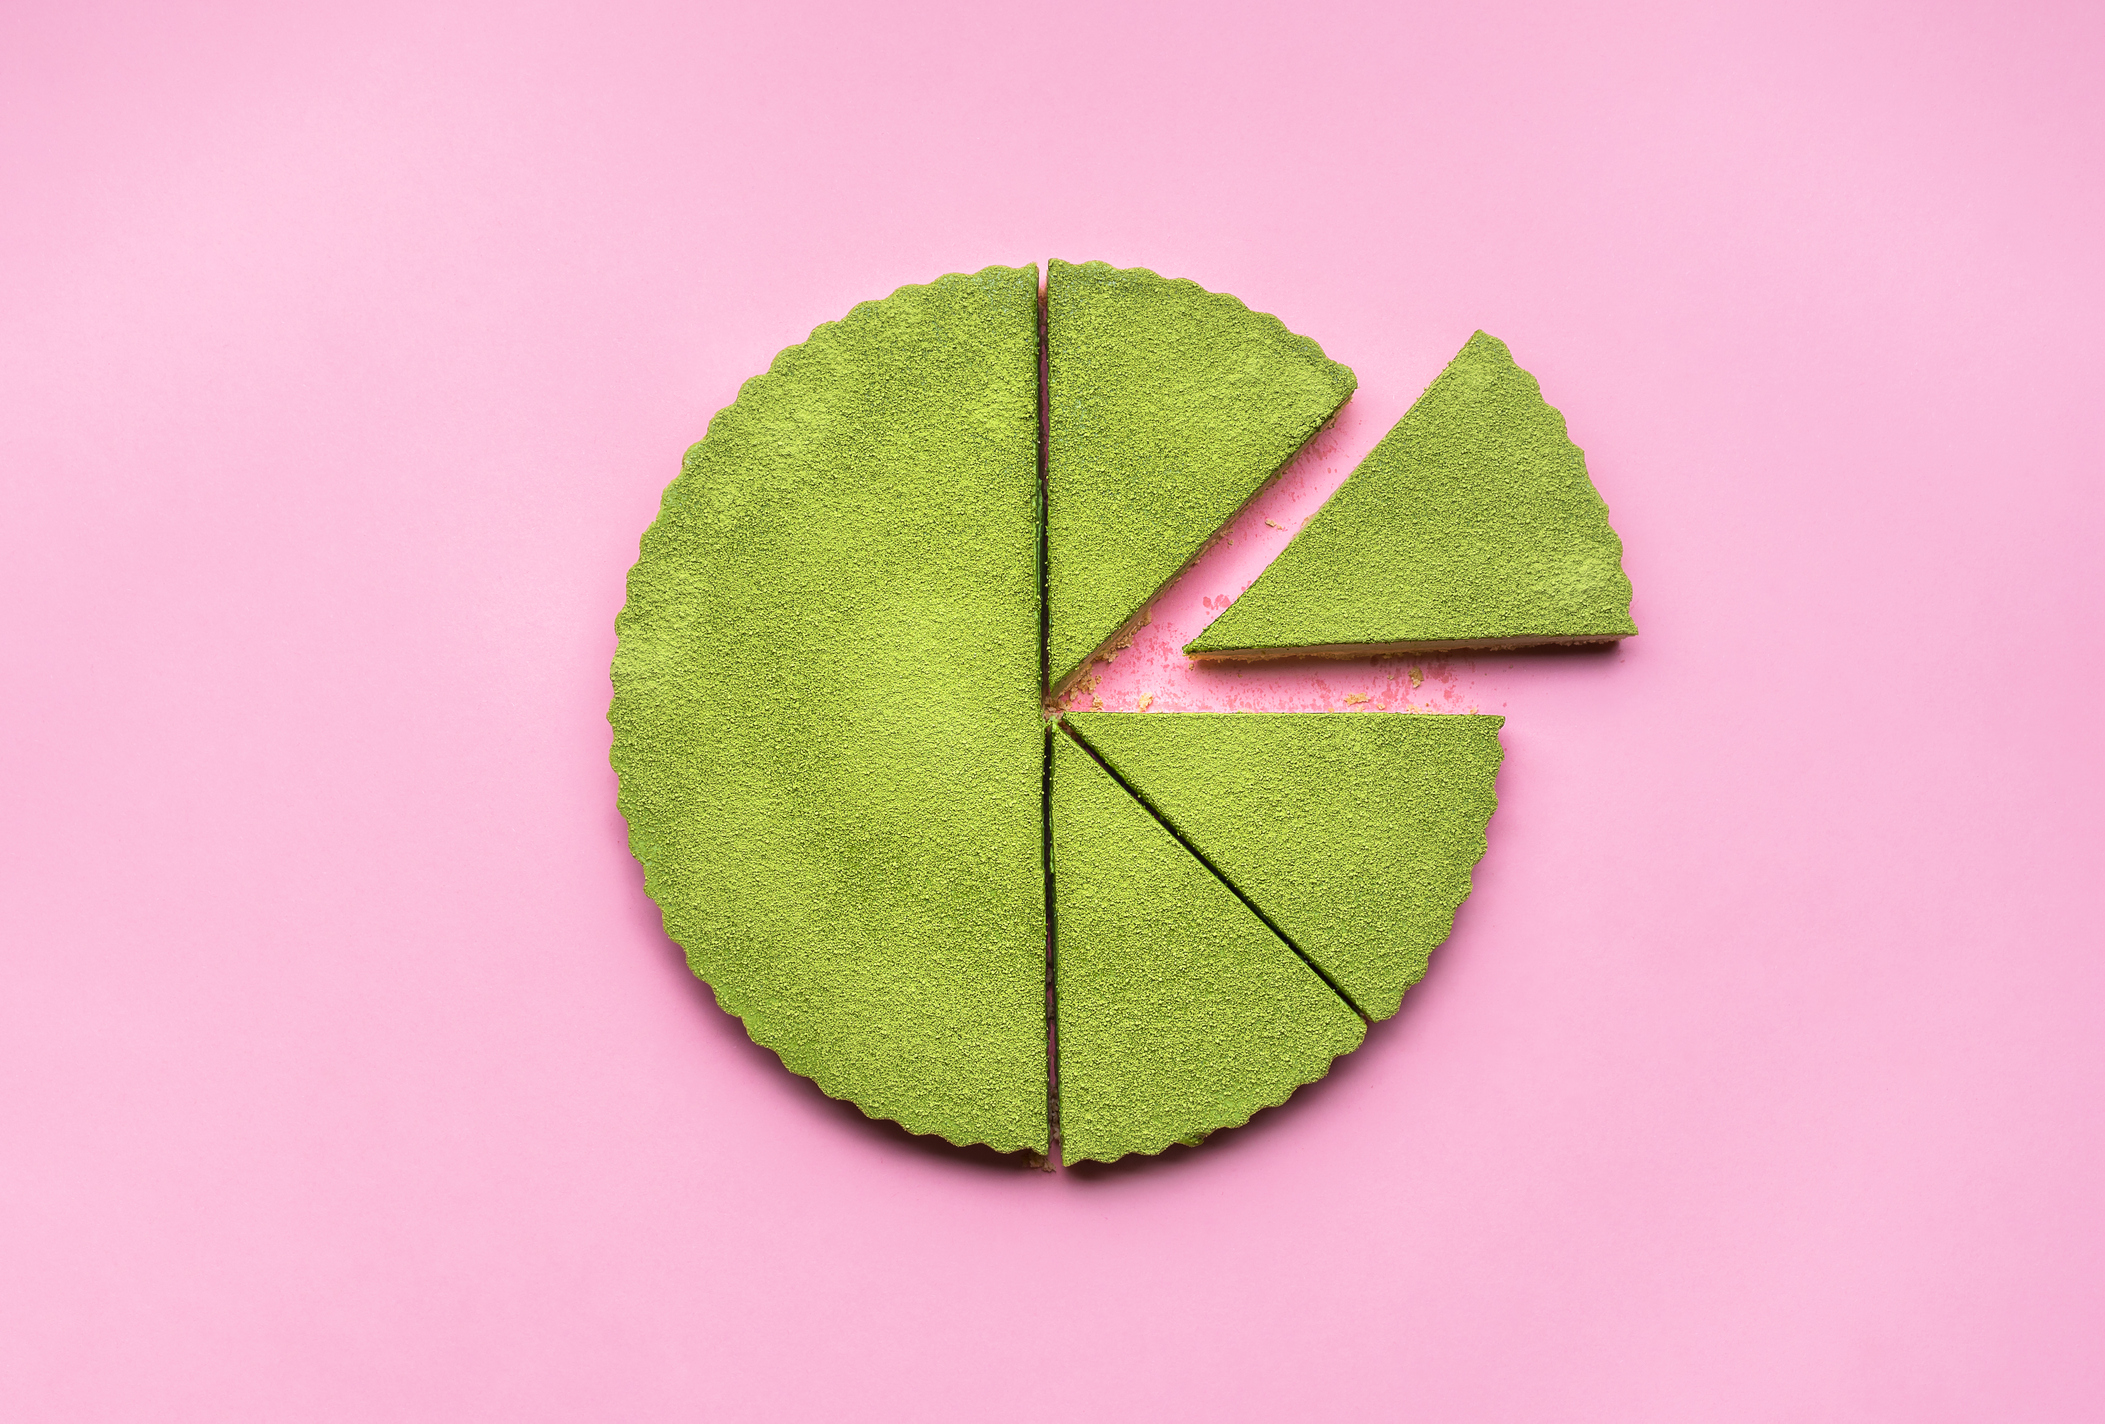 Sliced matcha cheesecake on a pink seamless background. pro rata rights startups